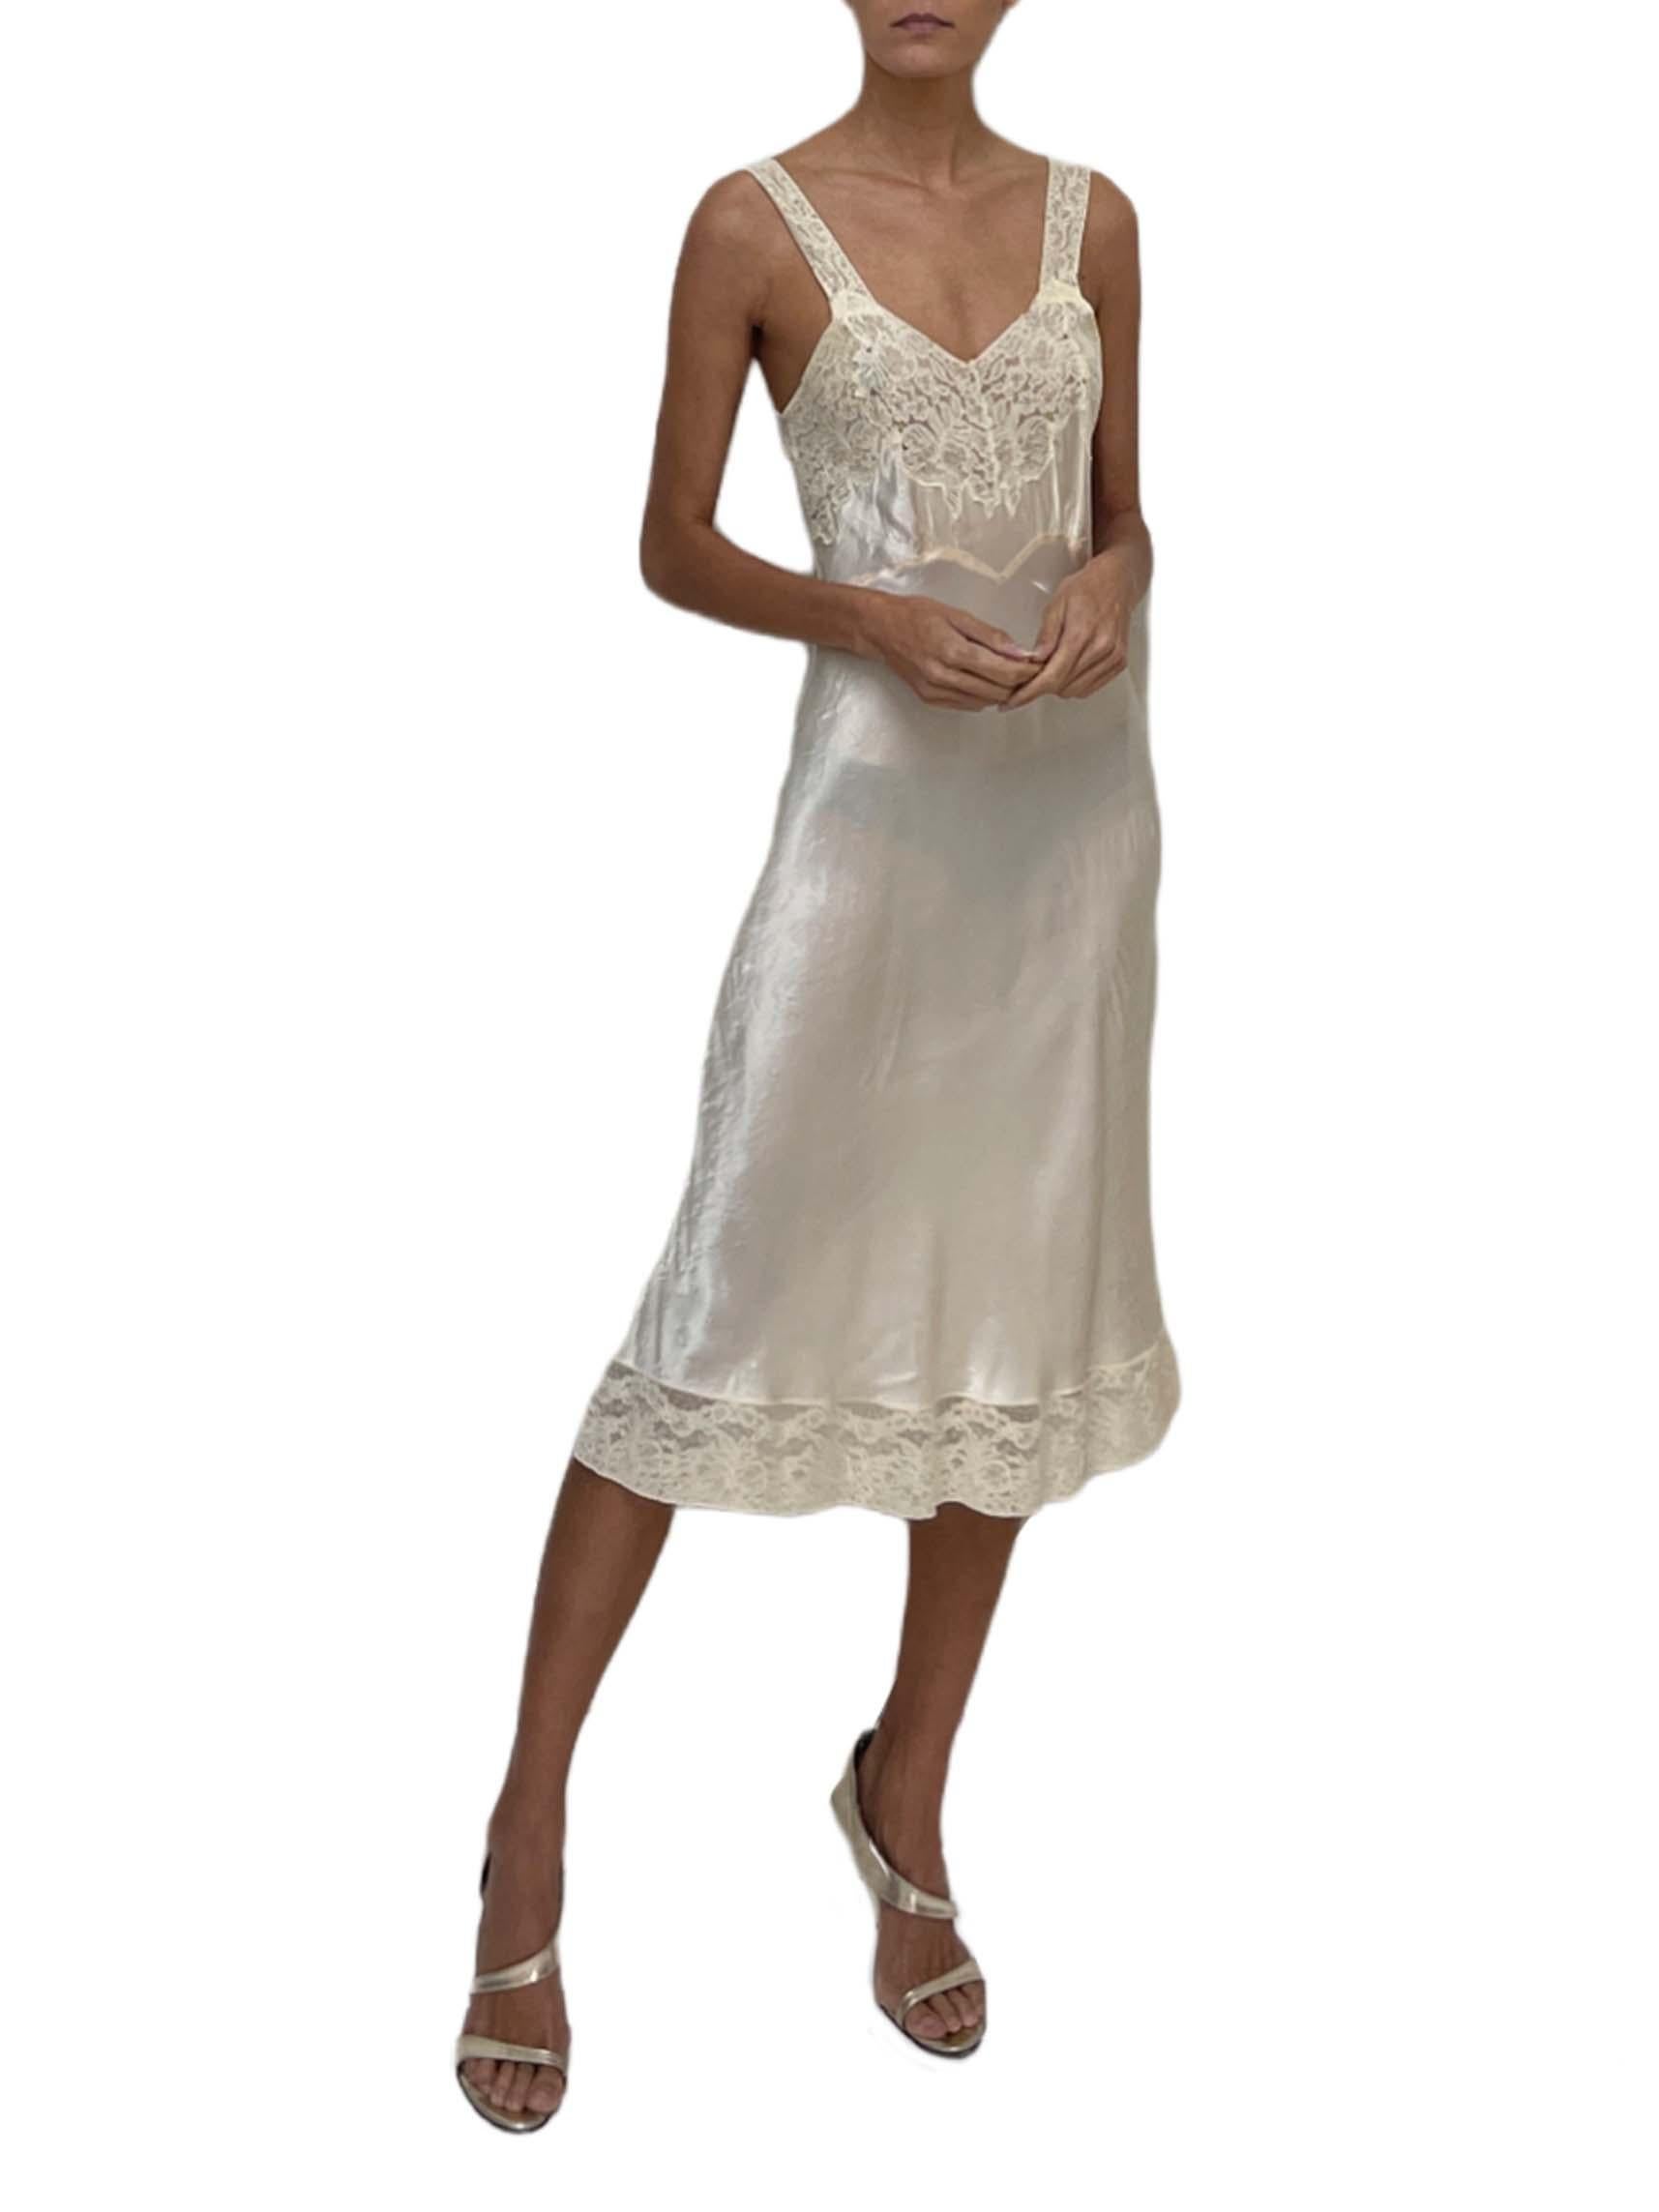 1940S Ivory Bias Cut Rayon Satin Slip With Lace Trim In Excellent Condition For Sale In New York, NY